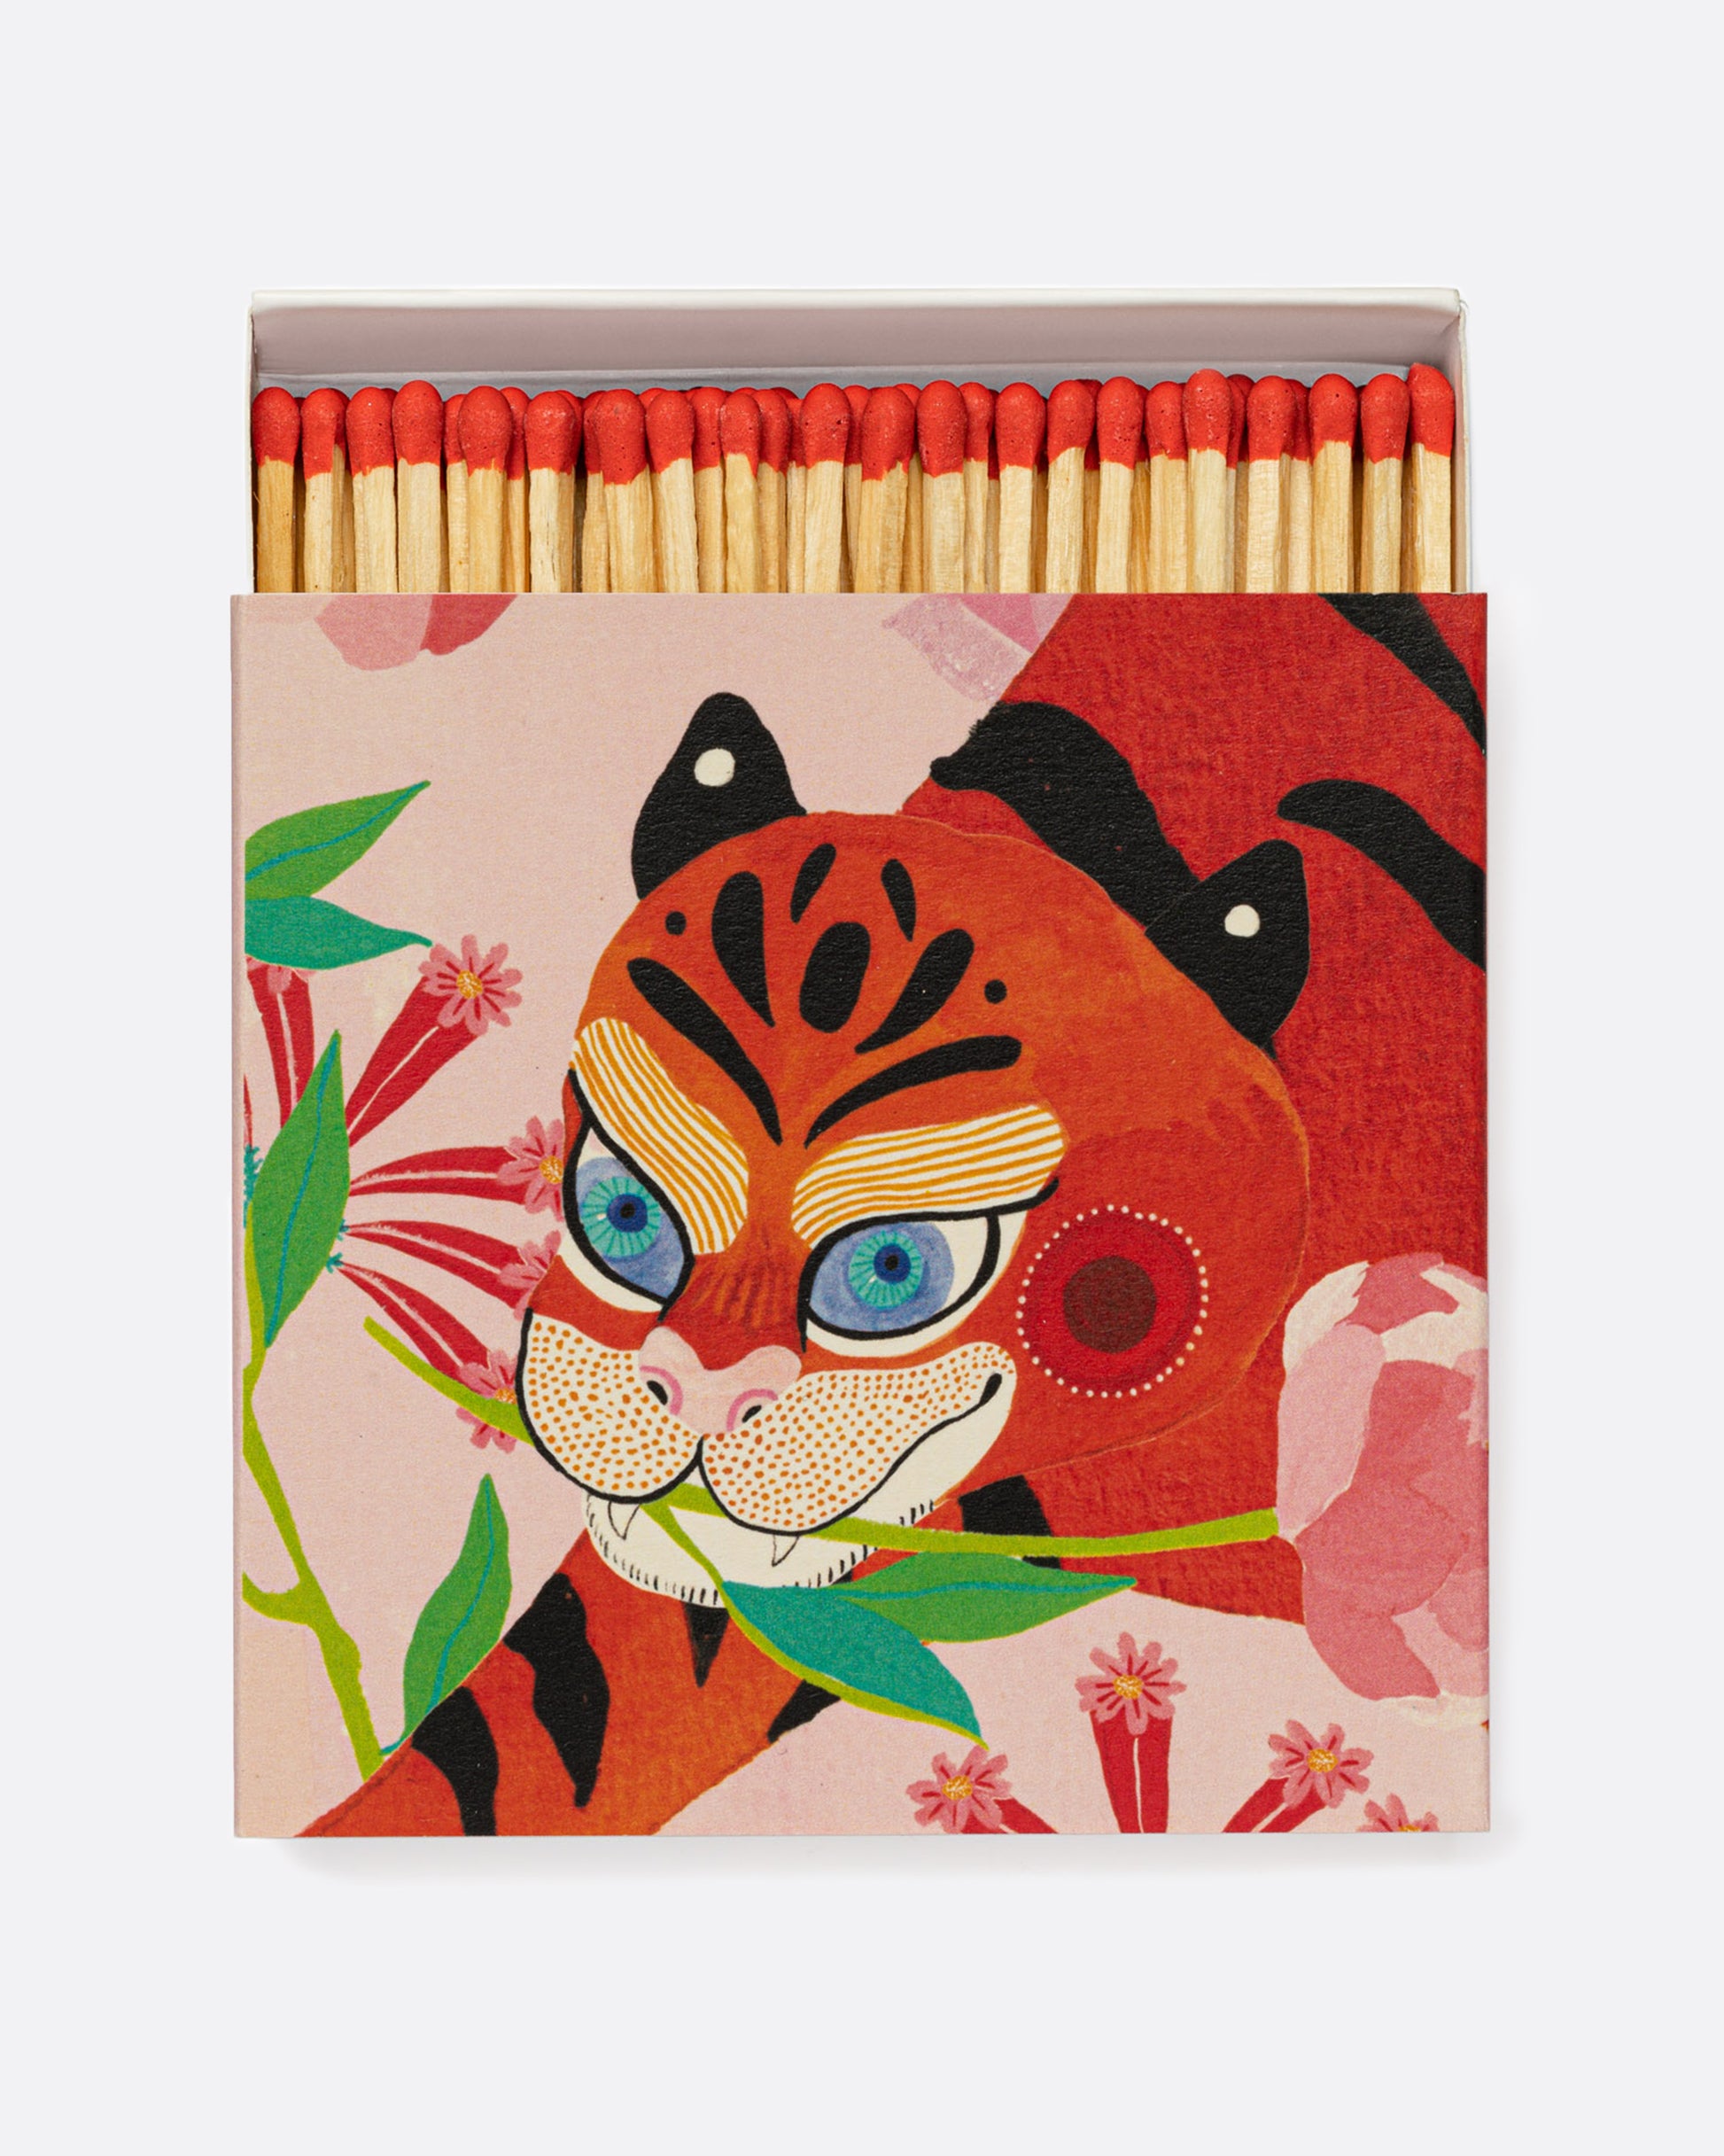 The matches in these fun, beautiful matchboxes are made from wood harvested from responsibly managed forests.